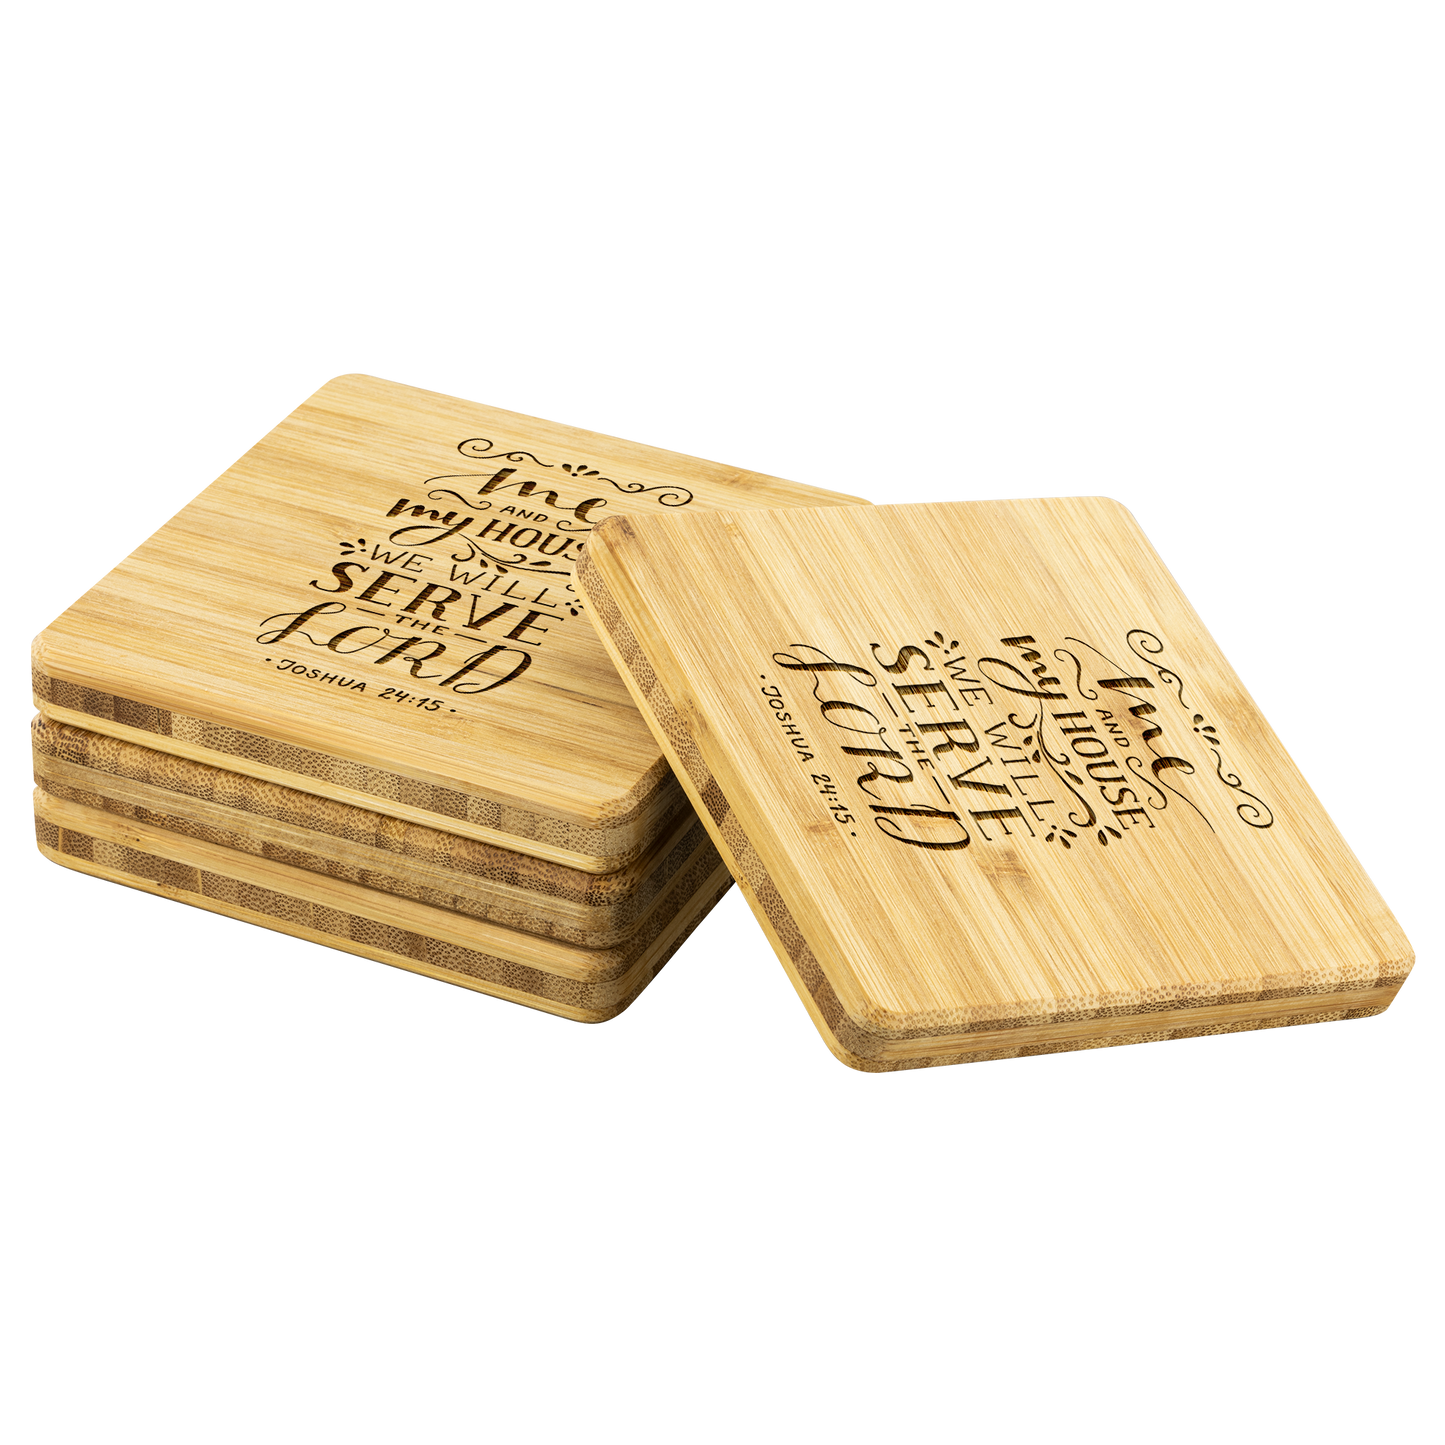 Me And My House We Will Serve The Lord - Bamboo Coasters